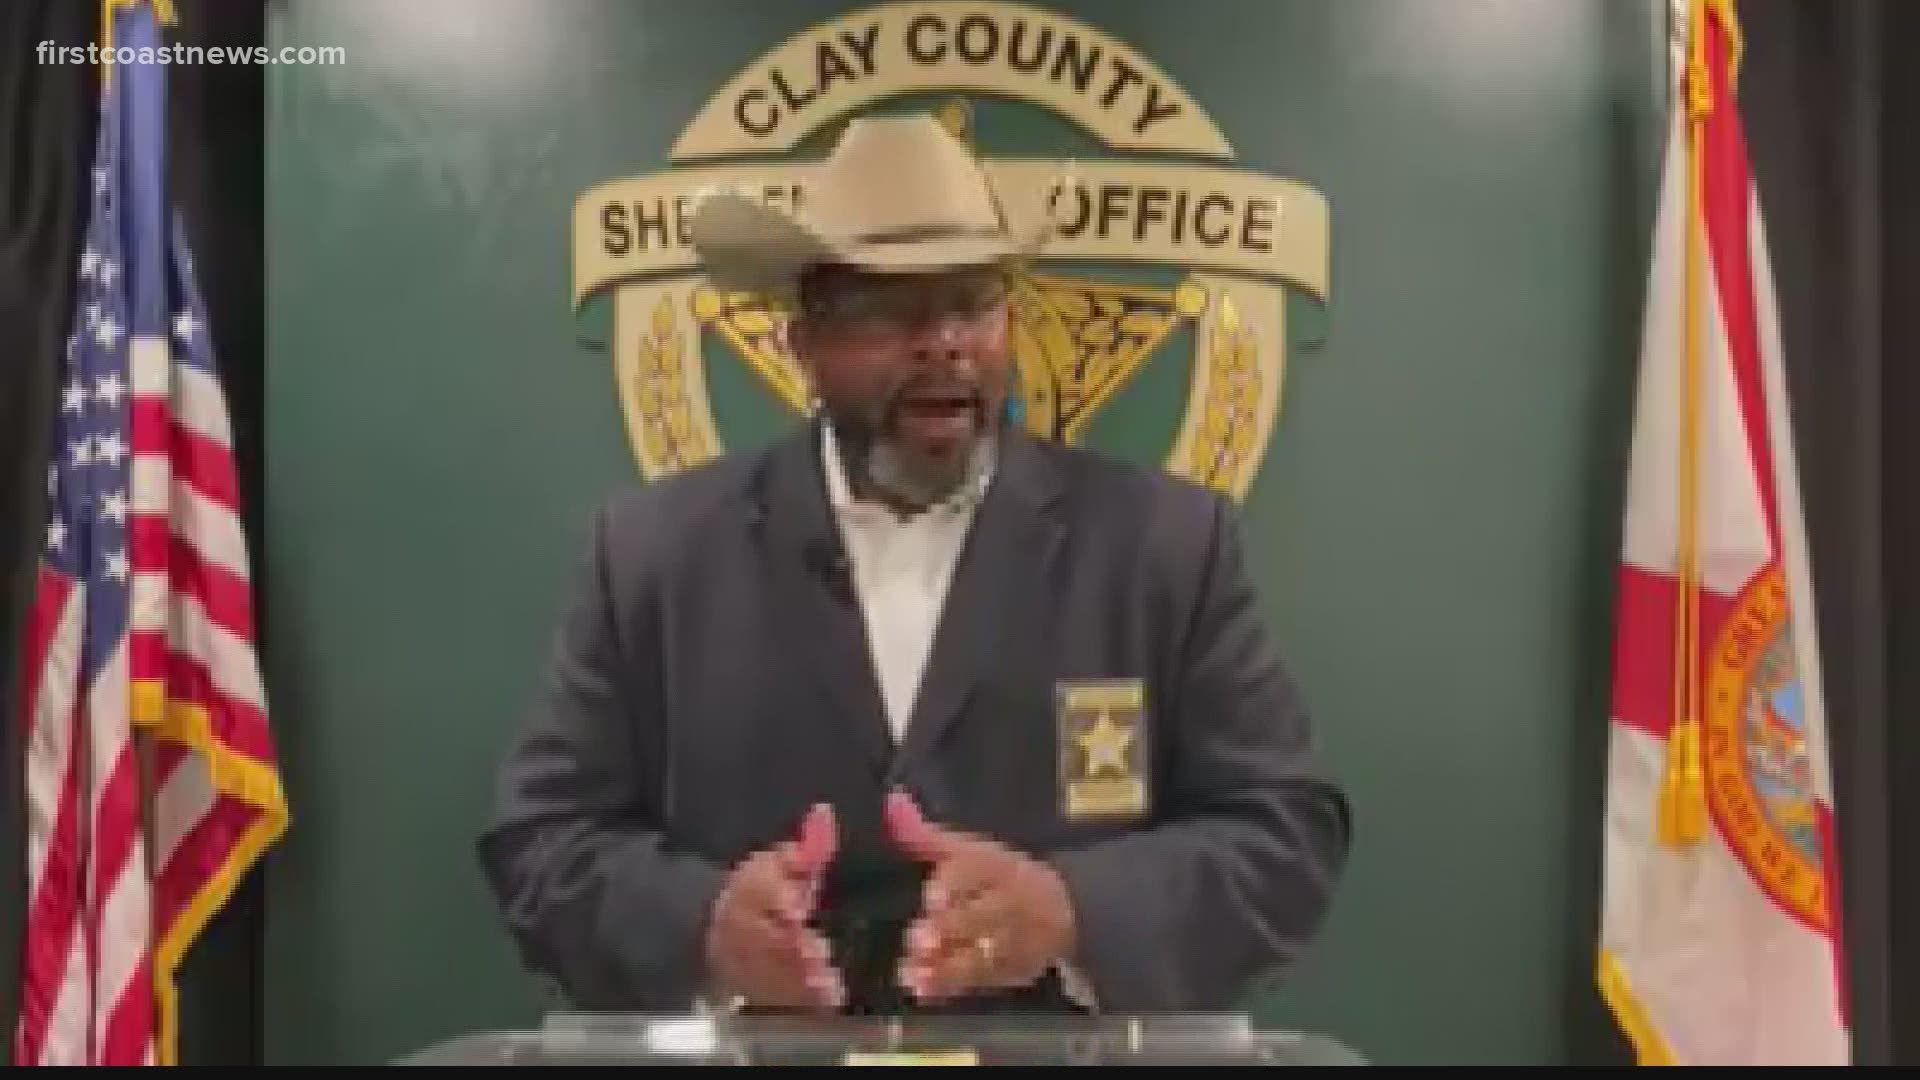 Sheriff Darryl Daniels is charged with tampering with evidence and knowingly giving false information to law enforcement linked to an affair with a former employee.